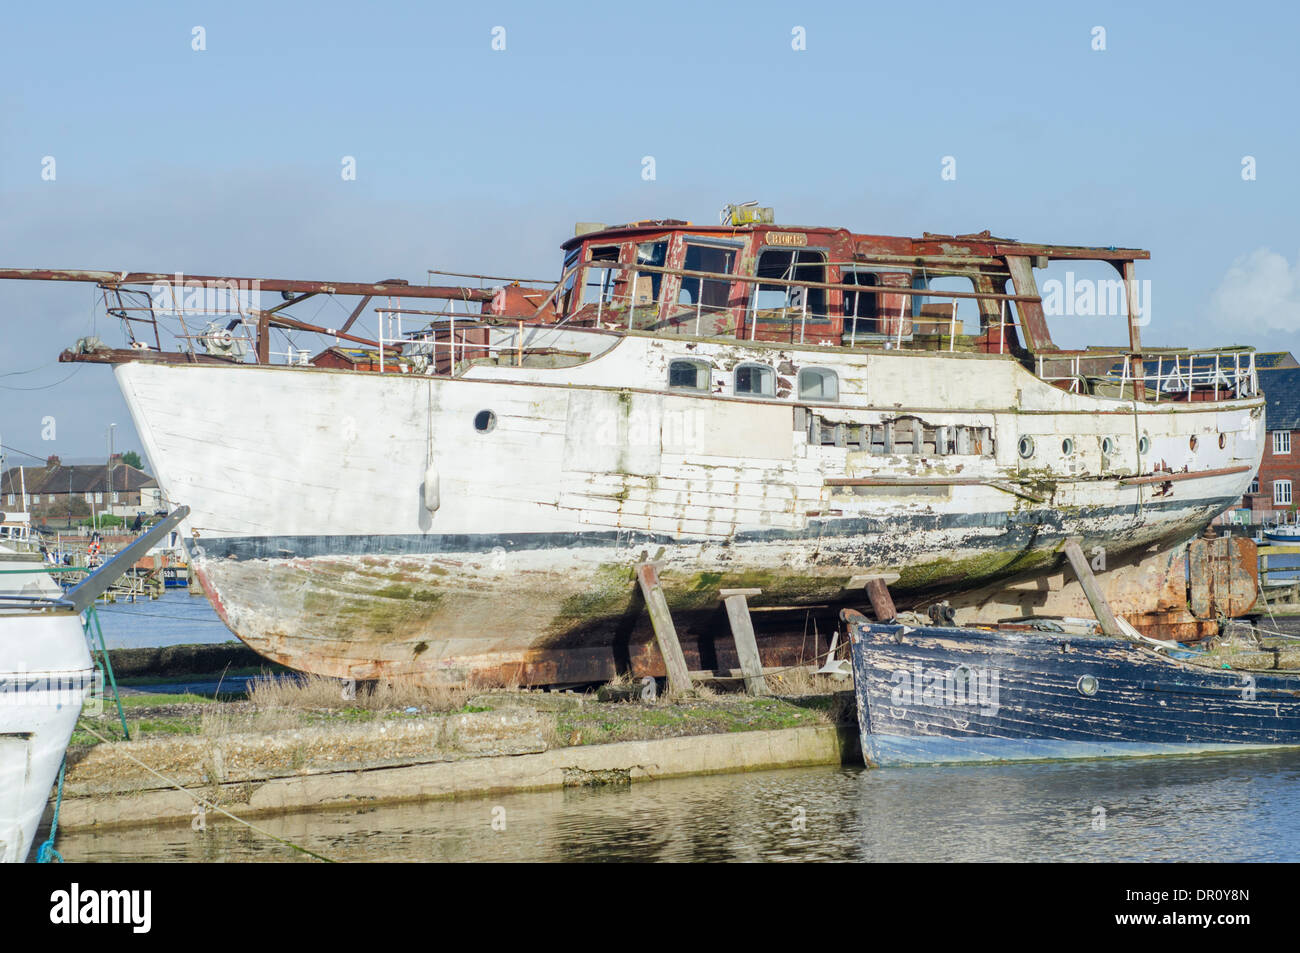 A wooden decaying boat out of the water by a river. Stock Photo